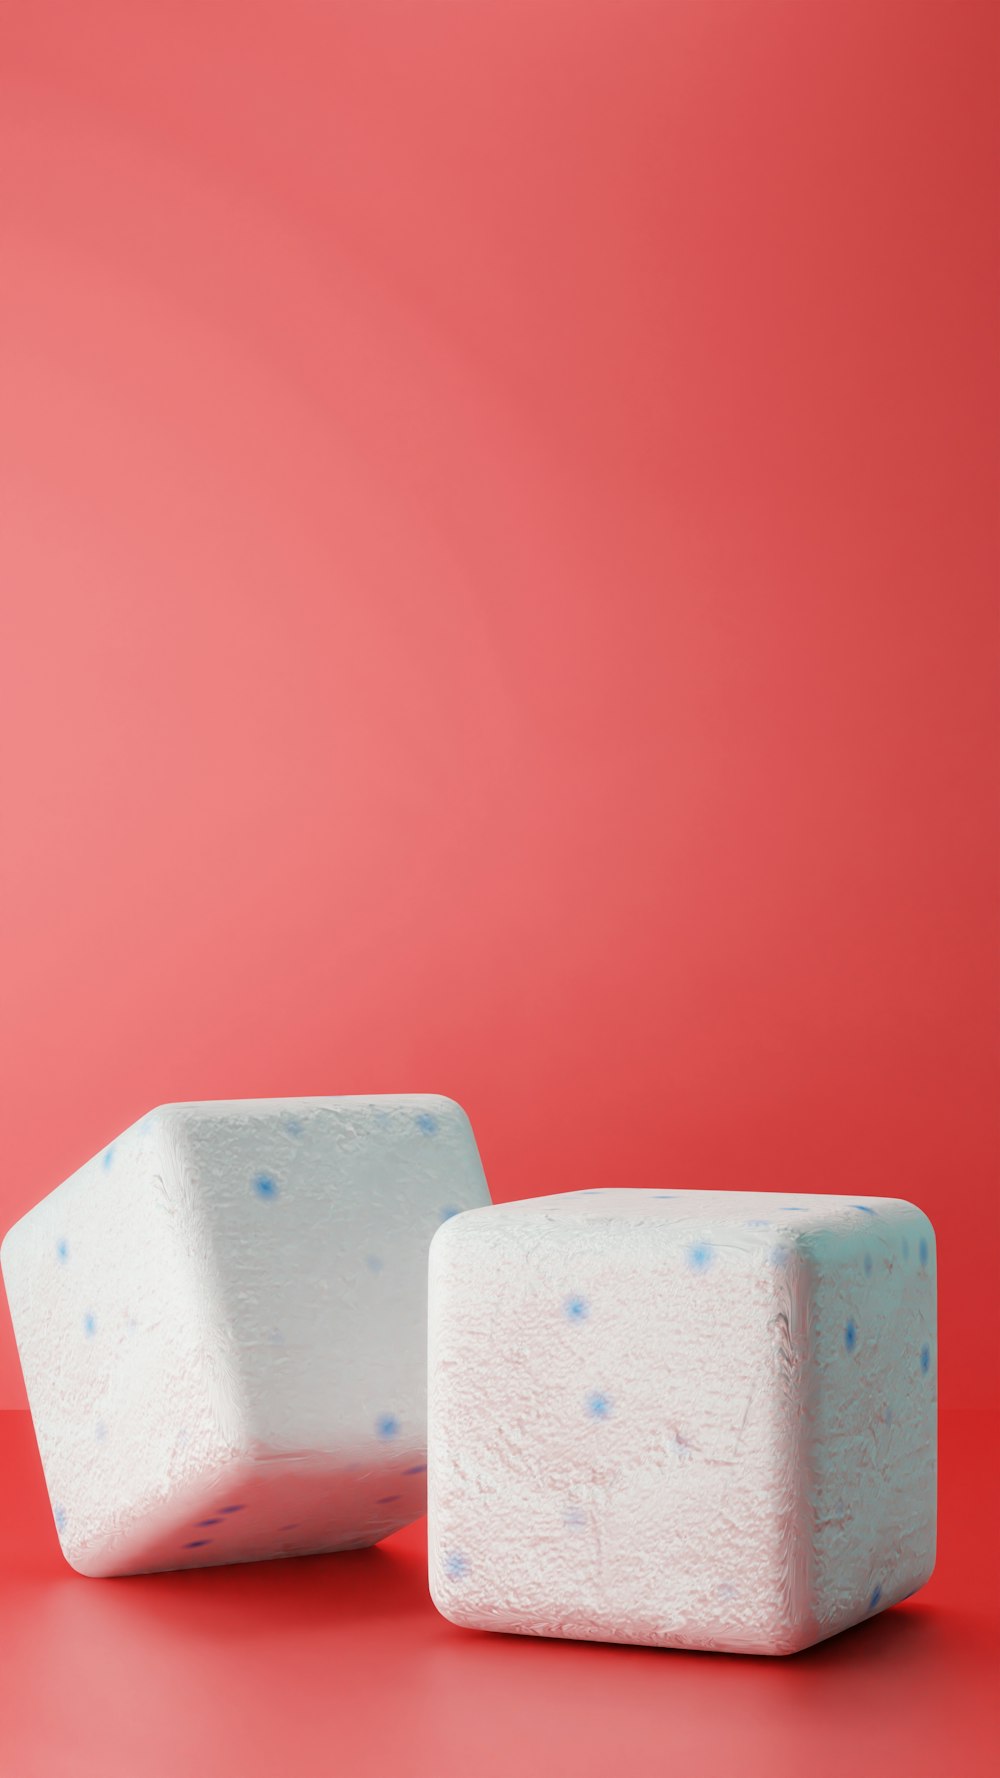 two white blocks of soap on a red background